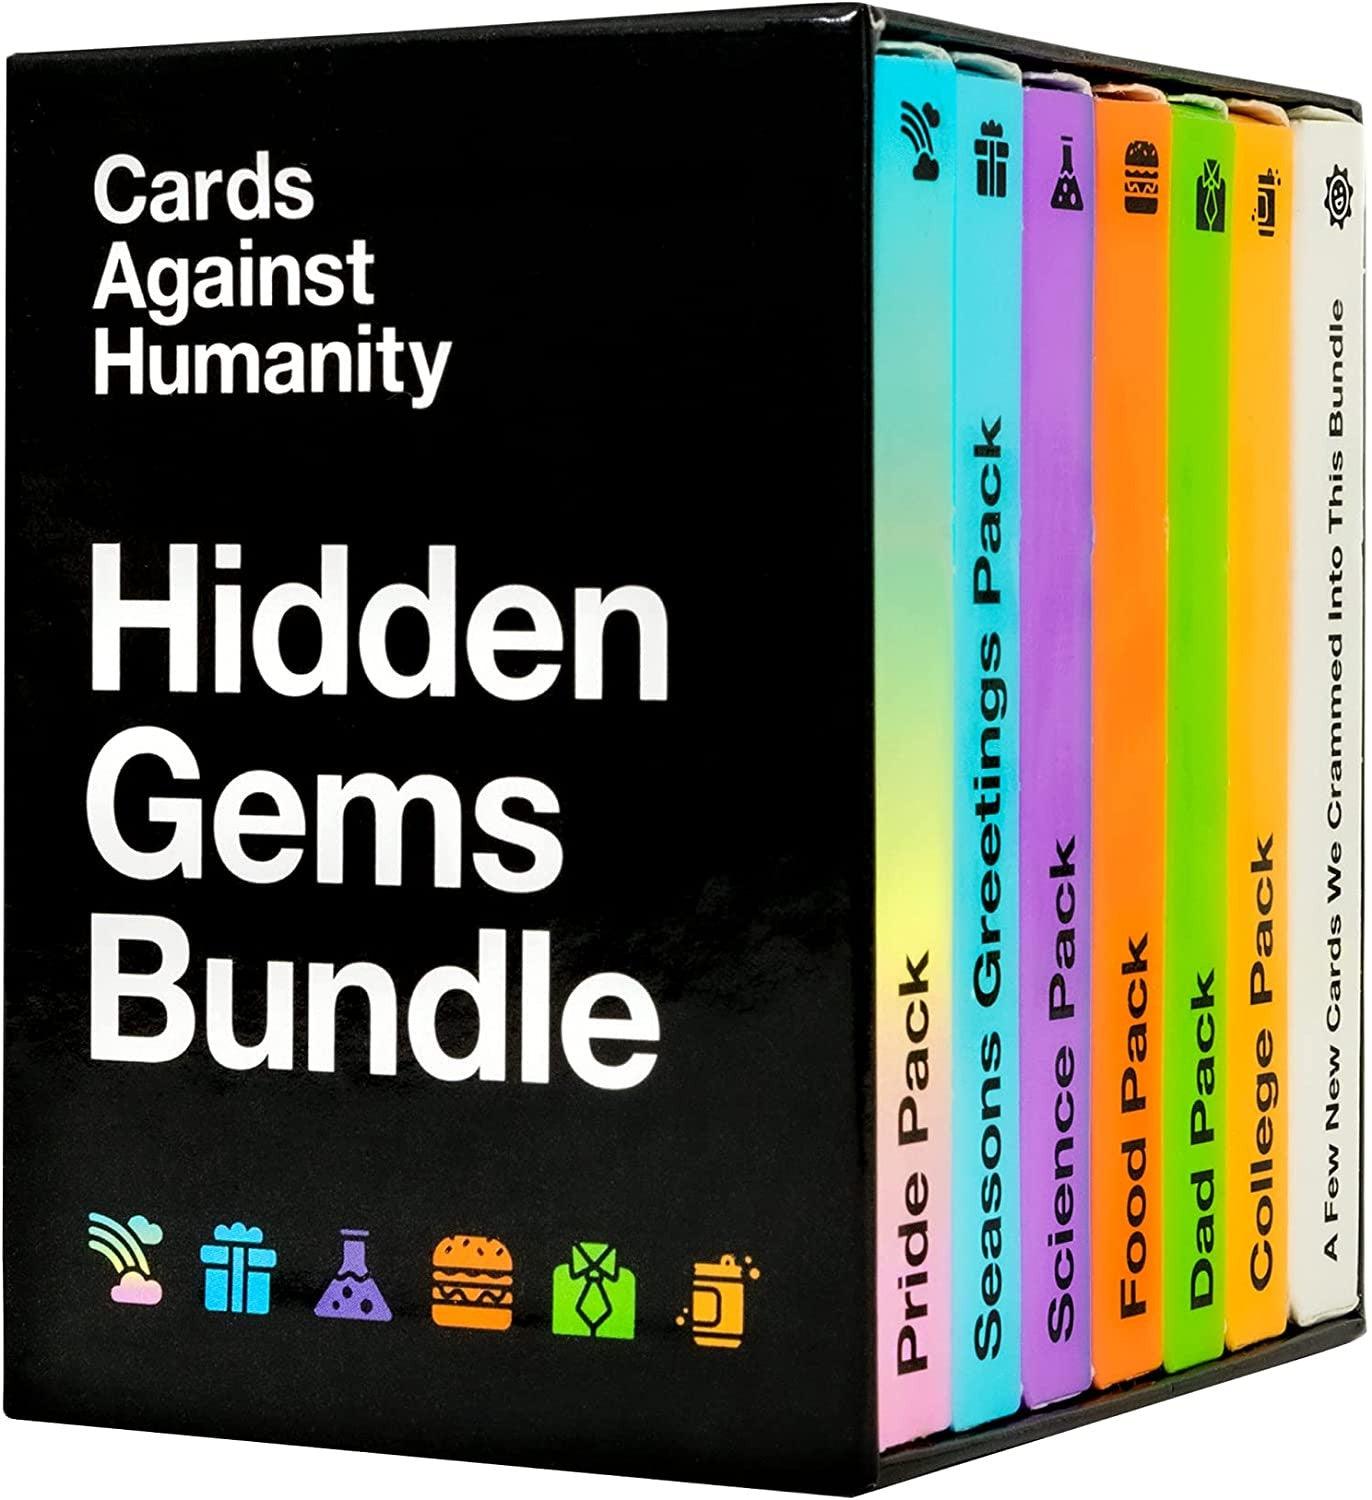 VR-98827 Cards Against Humanity Hidden Gems Bundle (Do not sell on online marketplaces) - Cards Against Humanity - Titan Pop Culture